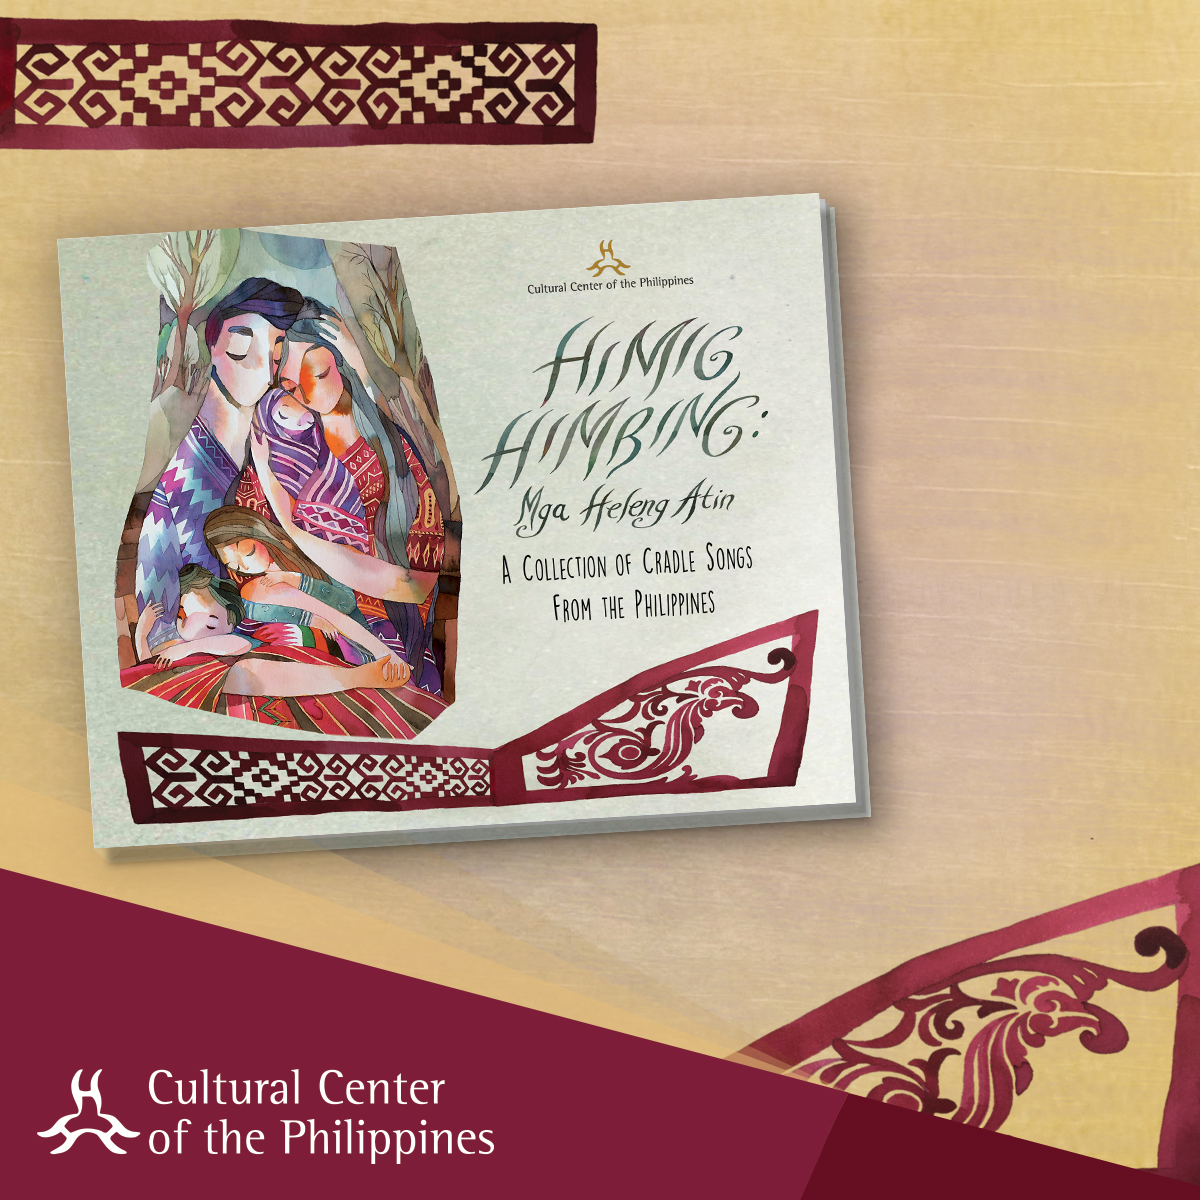 The HIMIG HIMBING Team would like thank the National Book Development Board (NBDB) Philippines and the Philippine Board on Books for Young People (PBBY) for including the CCP book publication, HIMIG HIMBING: Mga Heleng Atin: A Collection of Cradle Songs from the Philippines